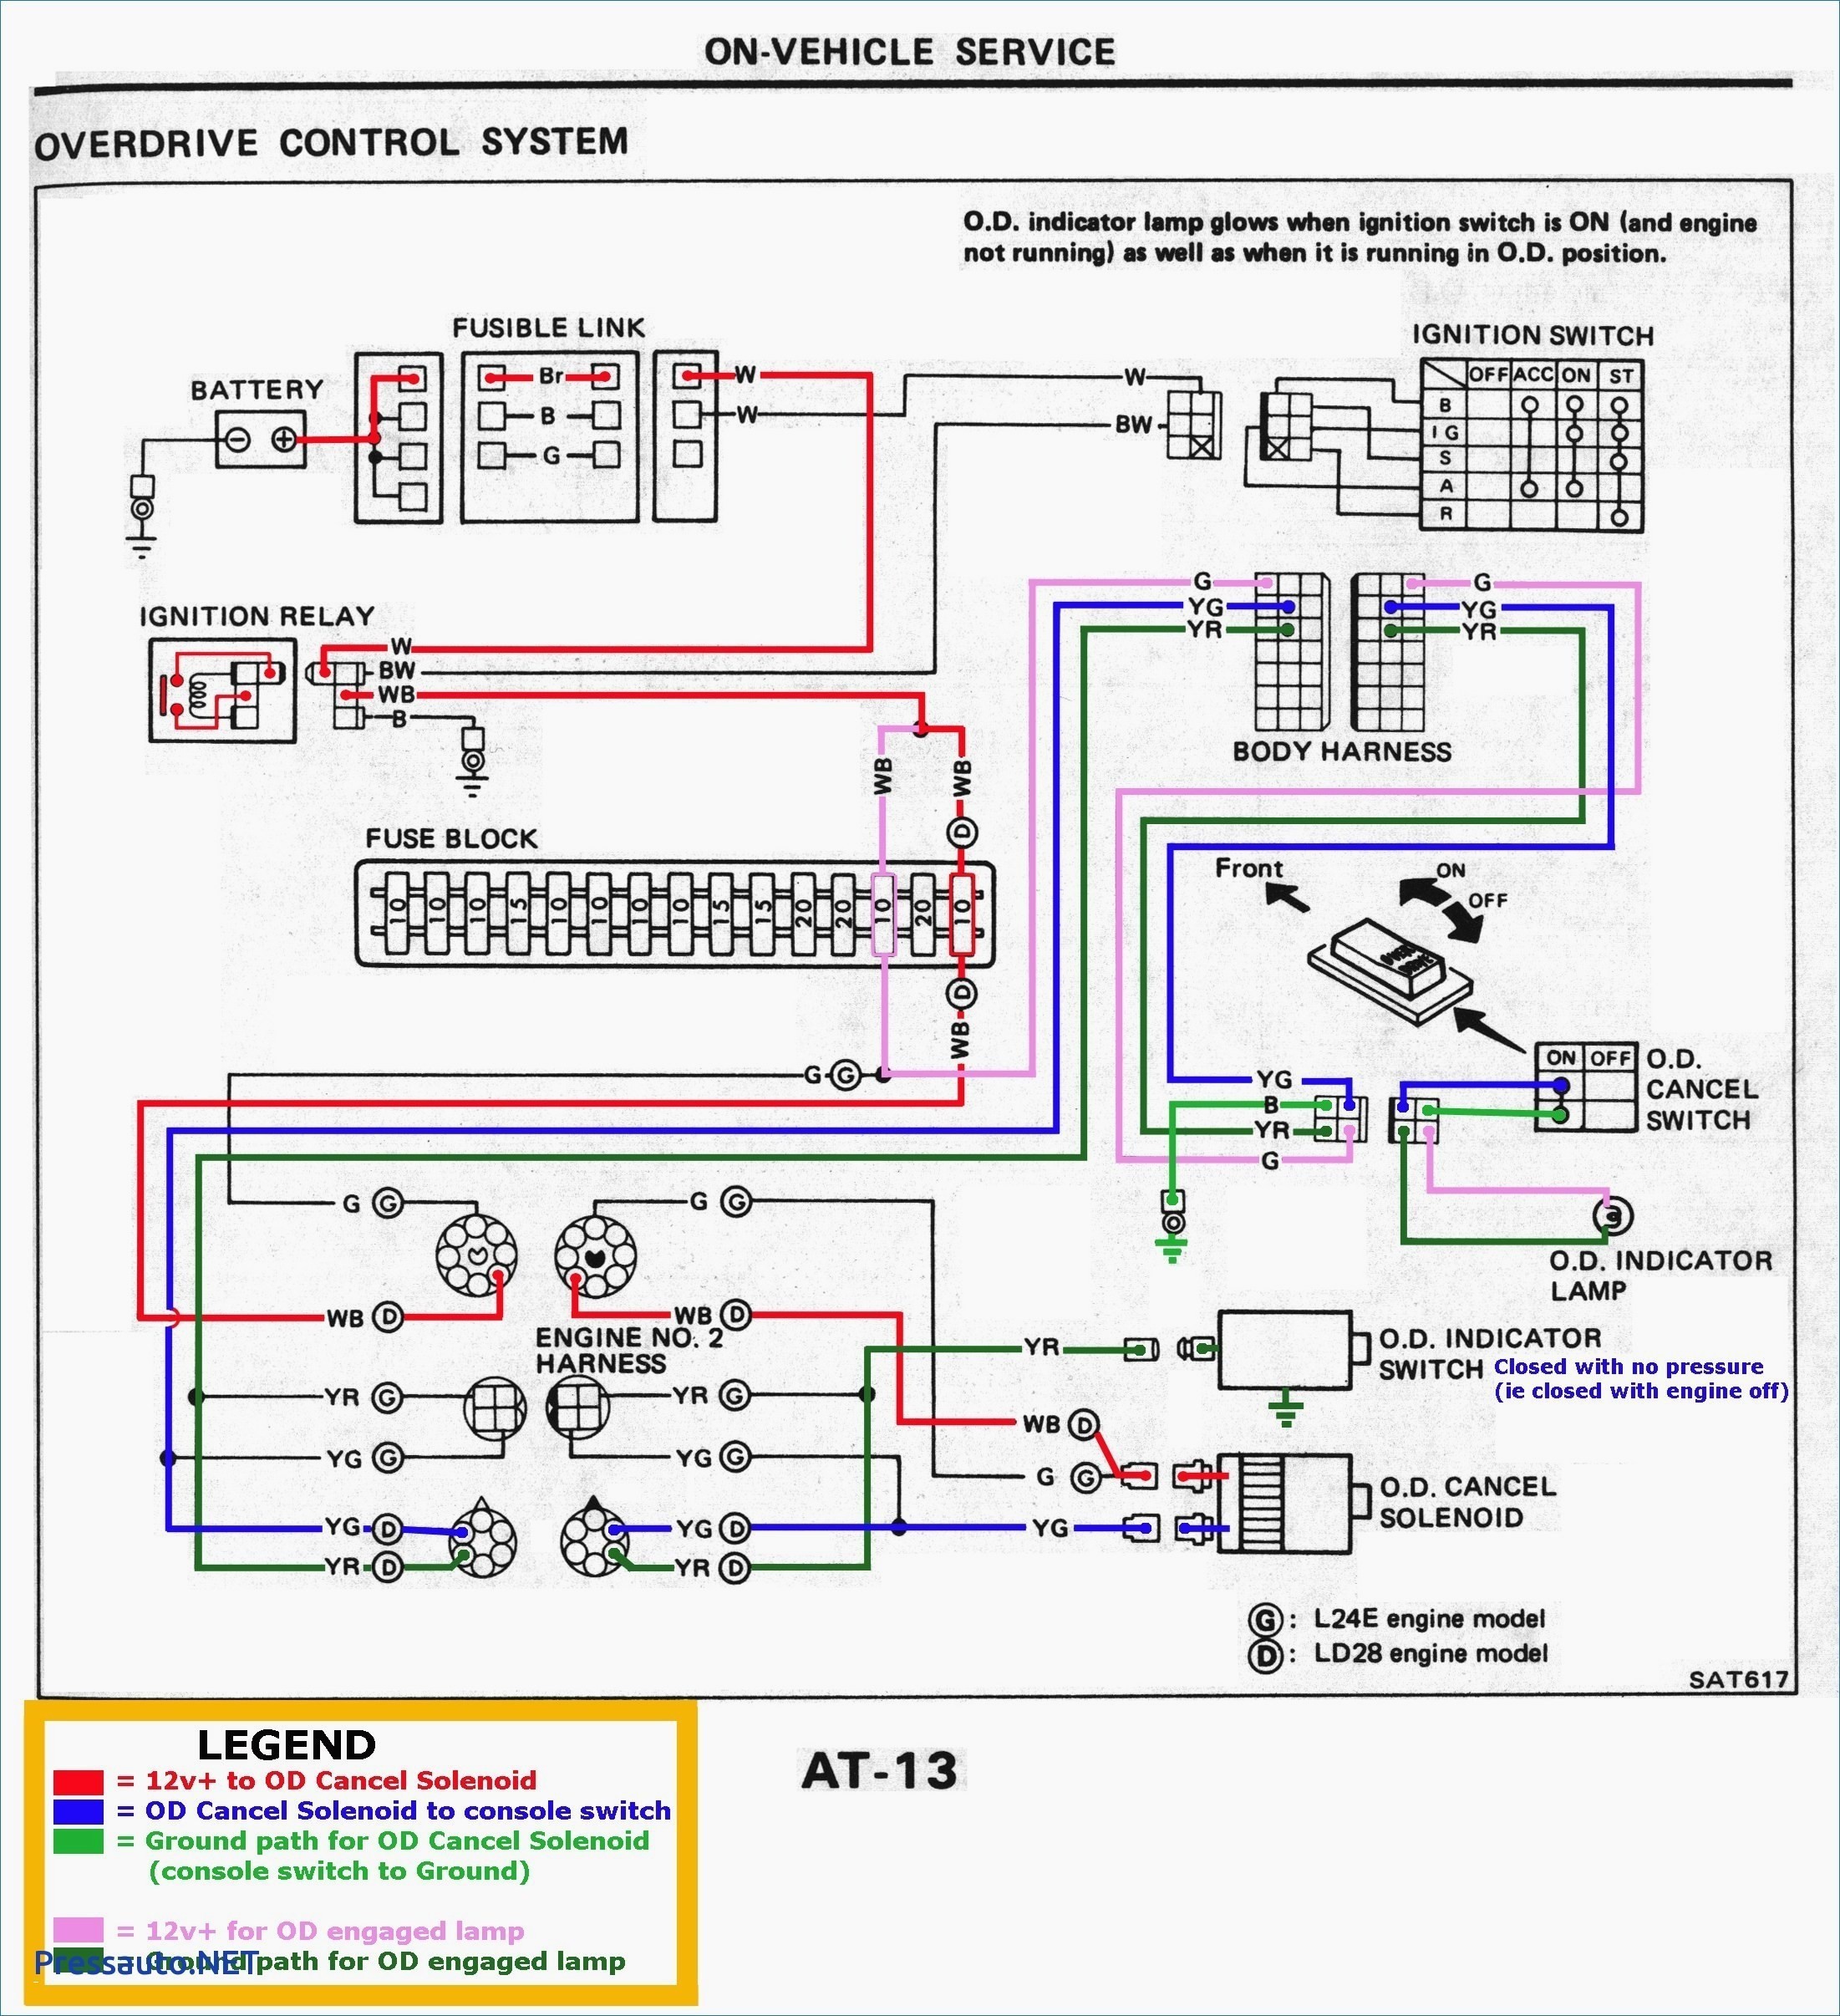 Home Cctv Wiring Diagram New Samsung Security Camera Wiring Diagram New Wiring Diagram Ip Camera